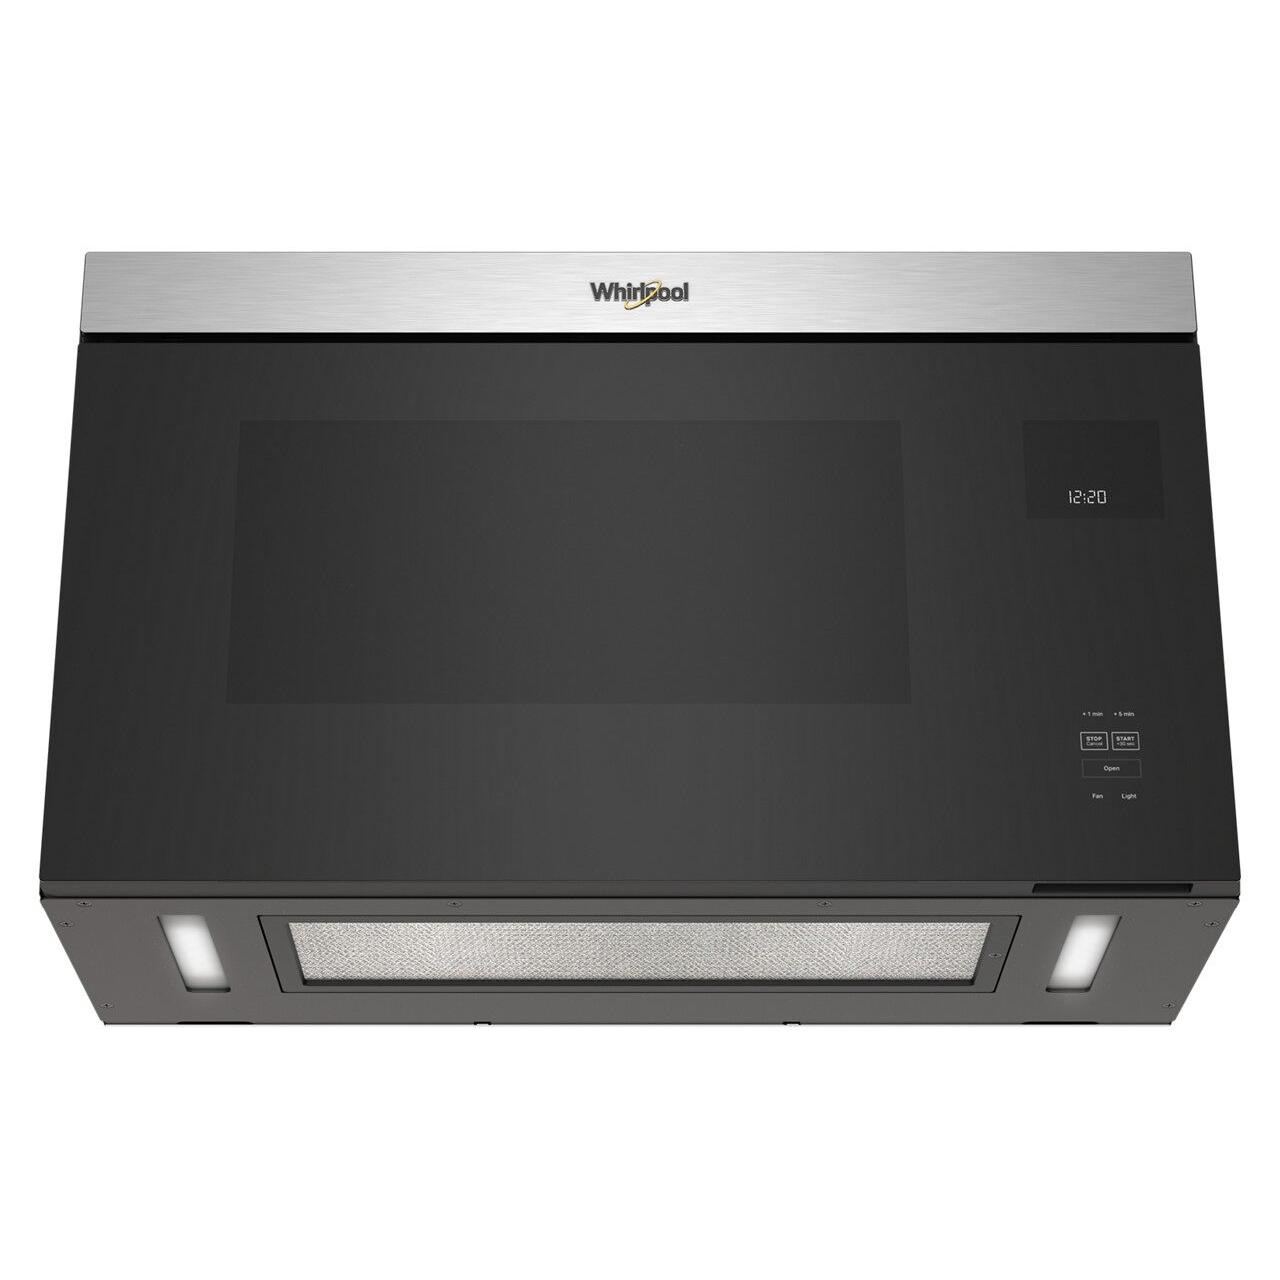 Whirlpool 30-inch Over-the-Range Microwave Oven WMMF5930PZ